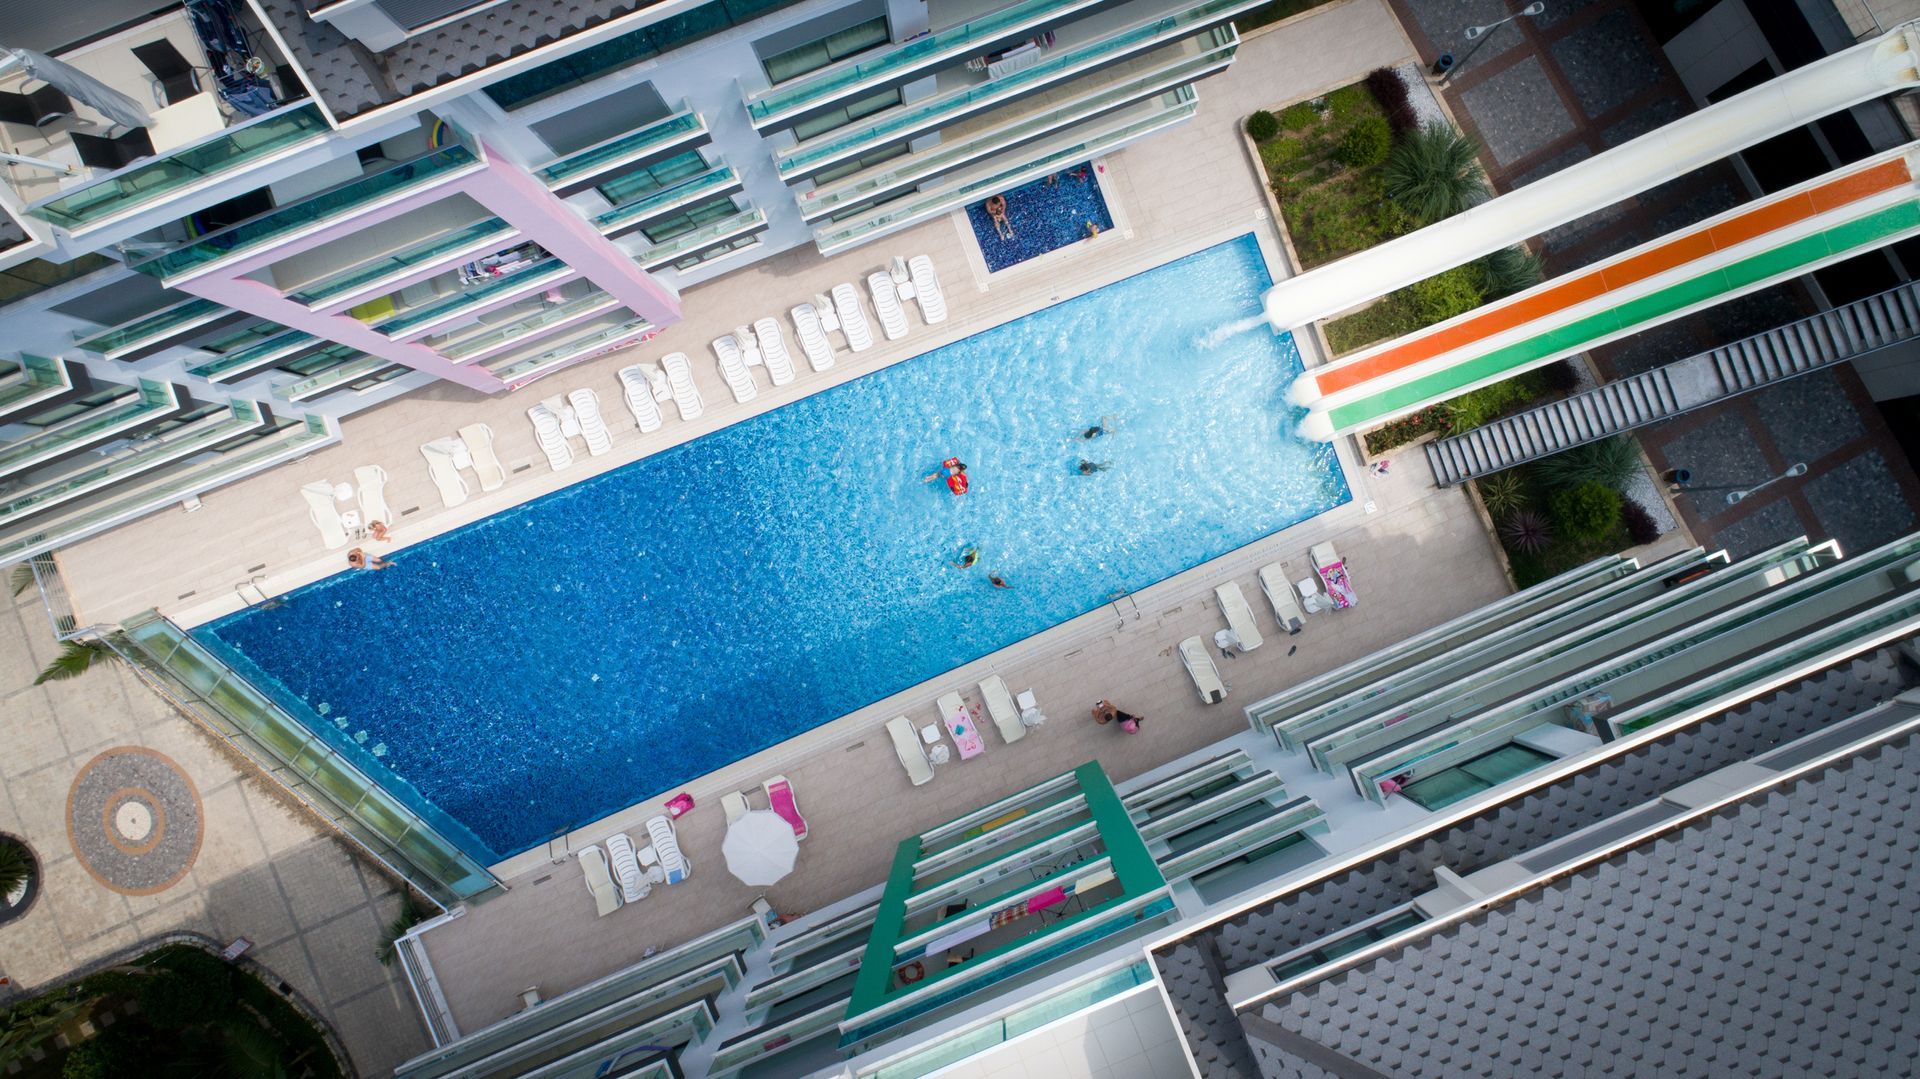 Resort Pool Aerial View | Sydney, Nsw | Mick's Pool Safety